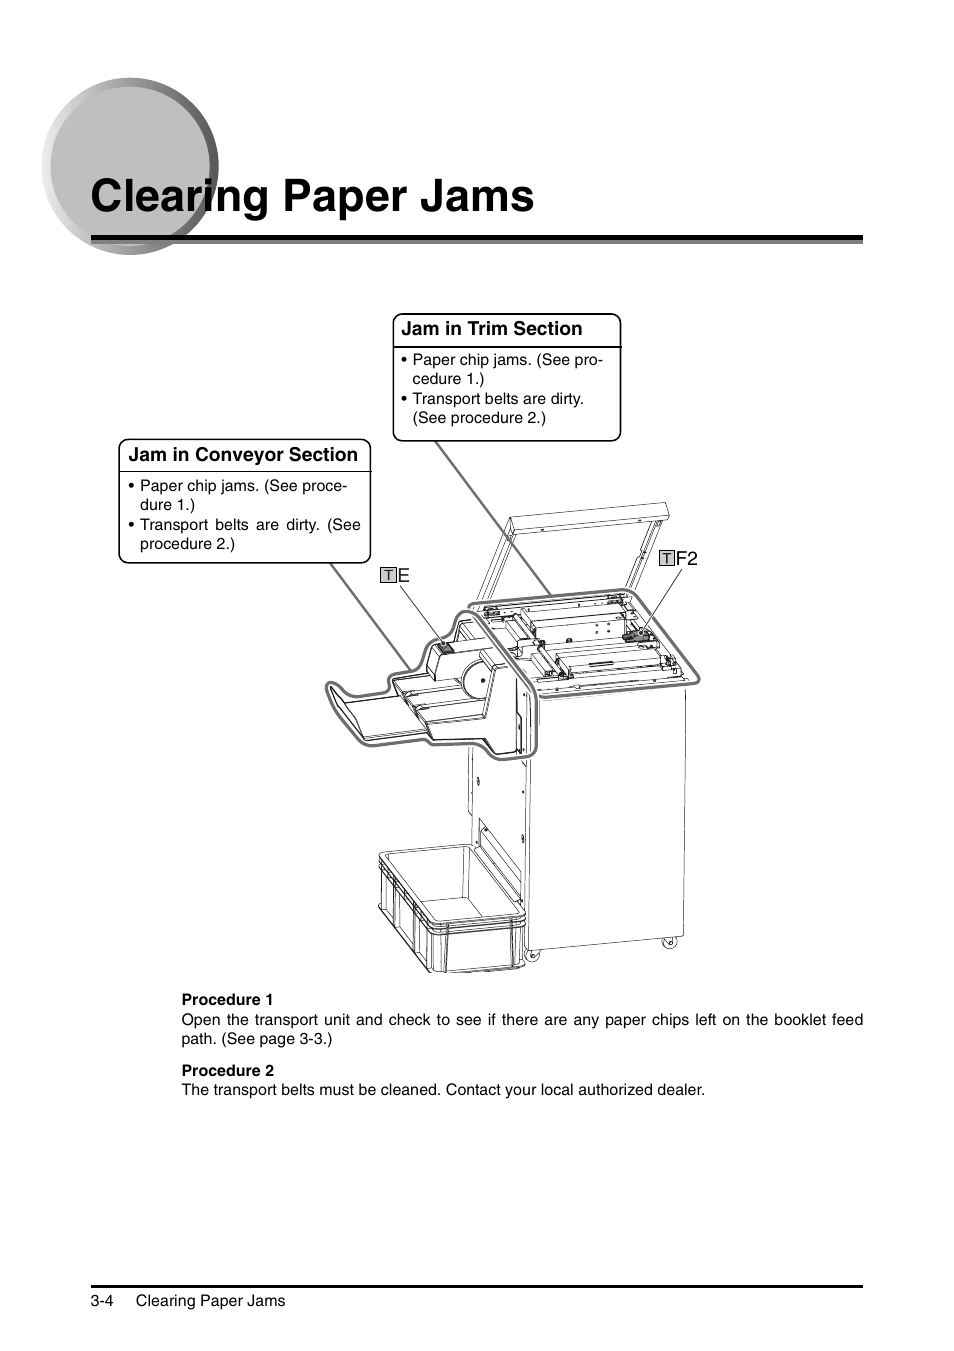 Clearing paper jams, Clearing paper jams -4 | Canon Trimmer User Manual | Page 21 / 26